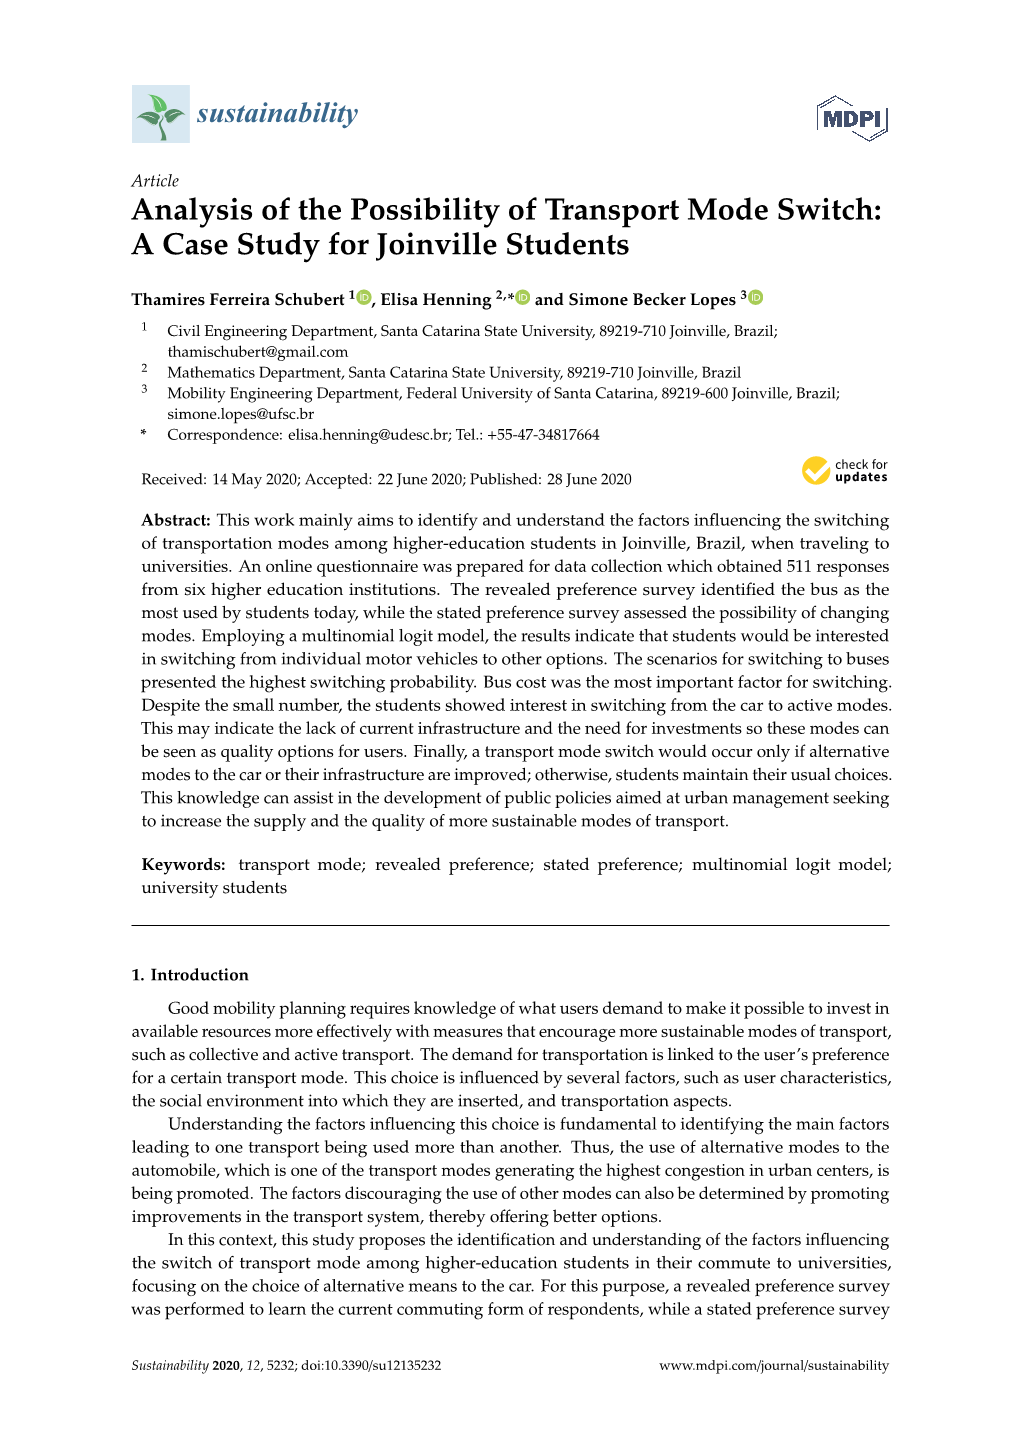 Analysis of the Possibility of Transport Mode Switch: a Case Study for Joinville Students